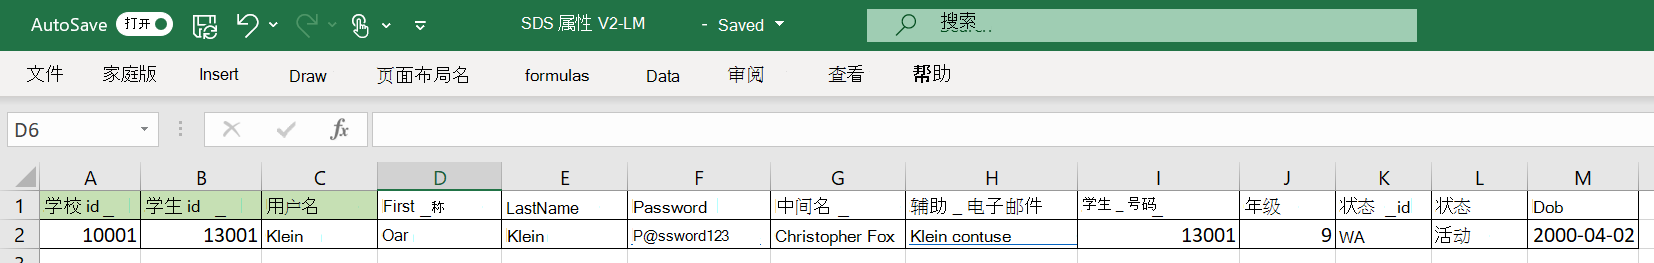 csv-files-for-school-data-sync-Clever-1.png。